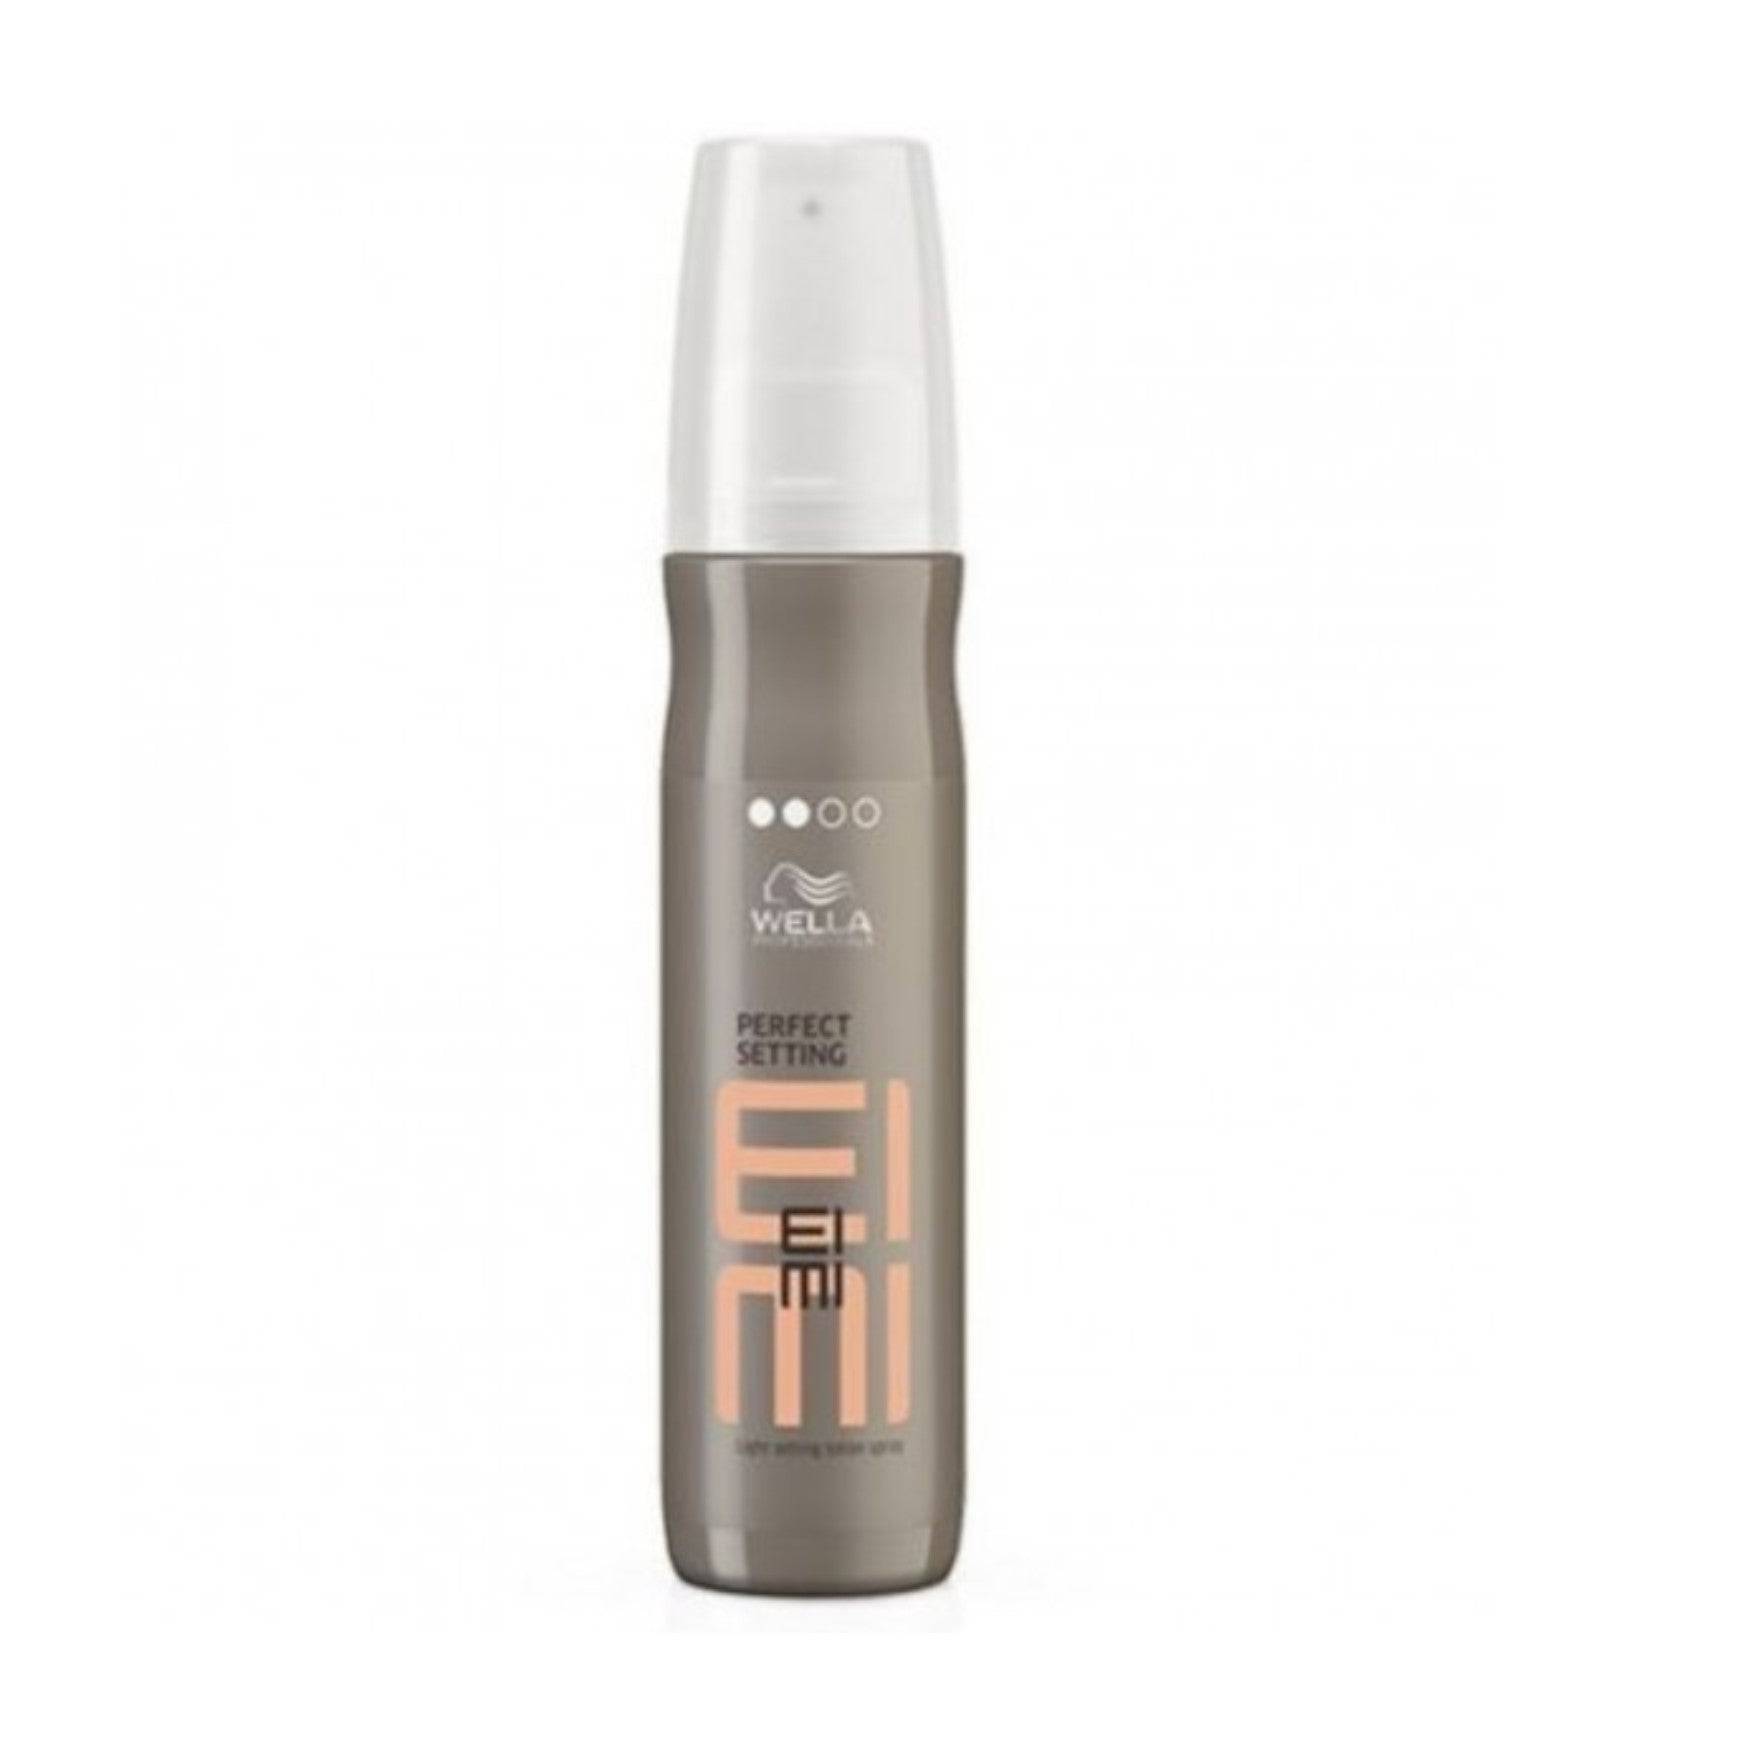 Wella Eimi Volume Perfect Setting Blow Dry Lotion 150ml Wella Professionals - On Line Hair Depot